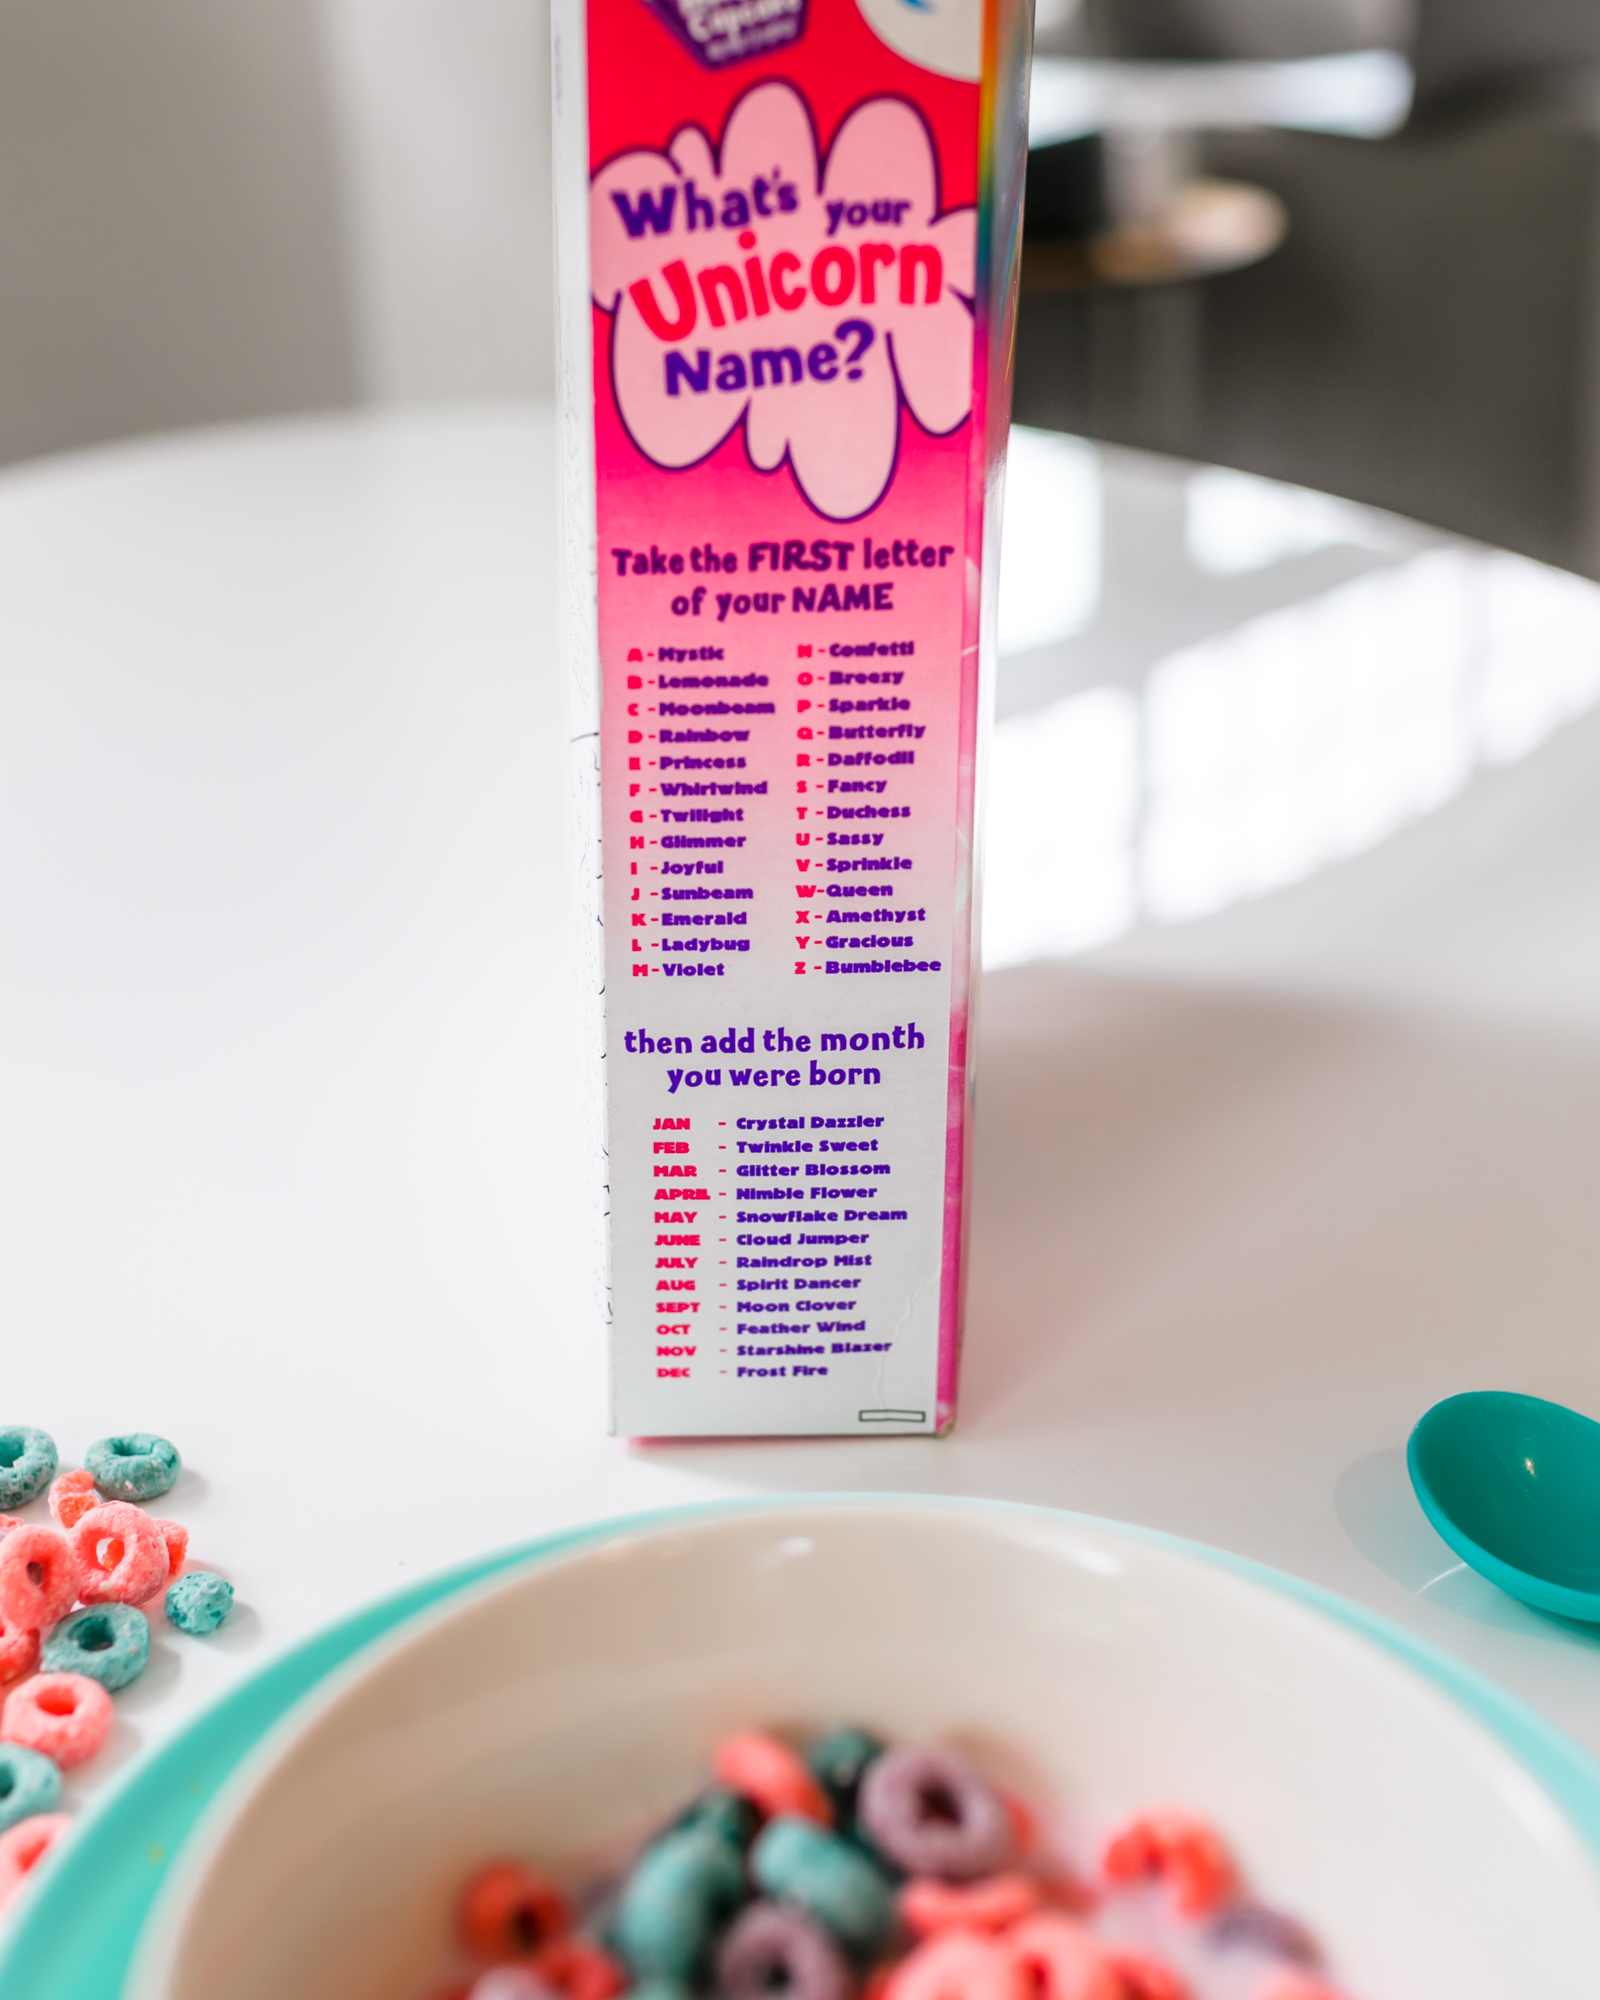 Want to get your hands on a box of limited edition Kellogg's Unicorn cereal? You will have to visit Kellogg's NYC Cafe in Union Square.